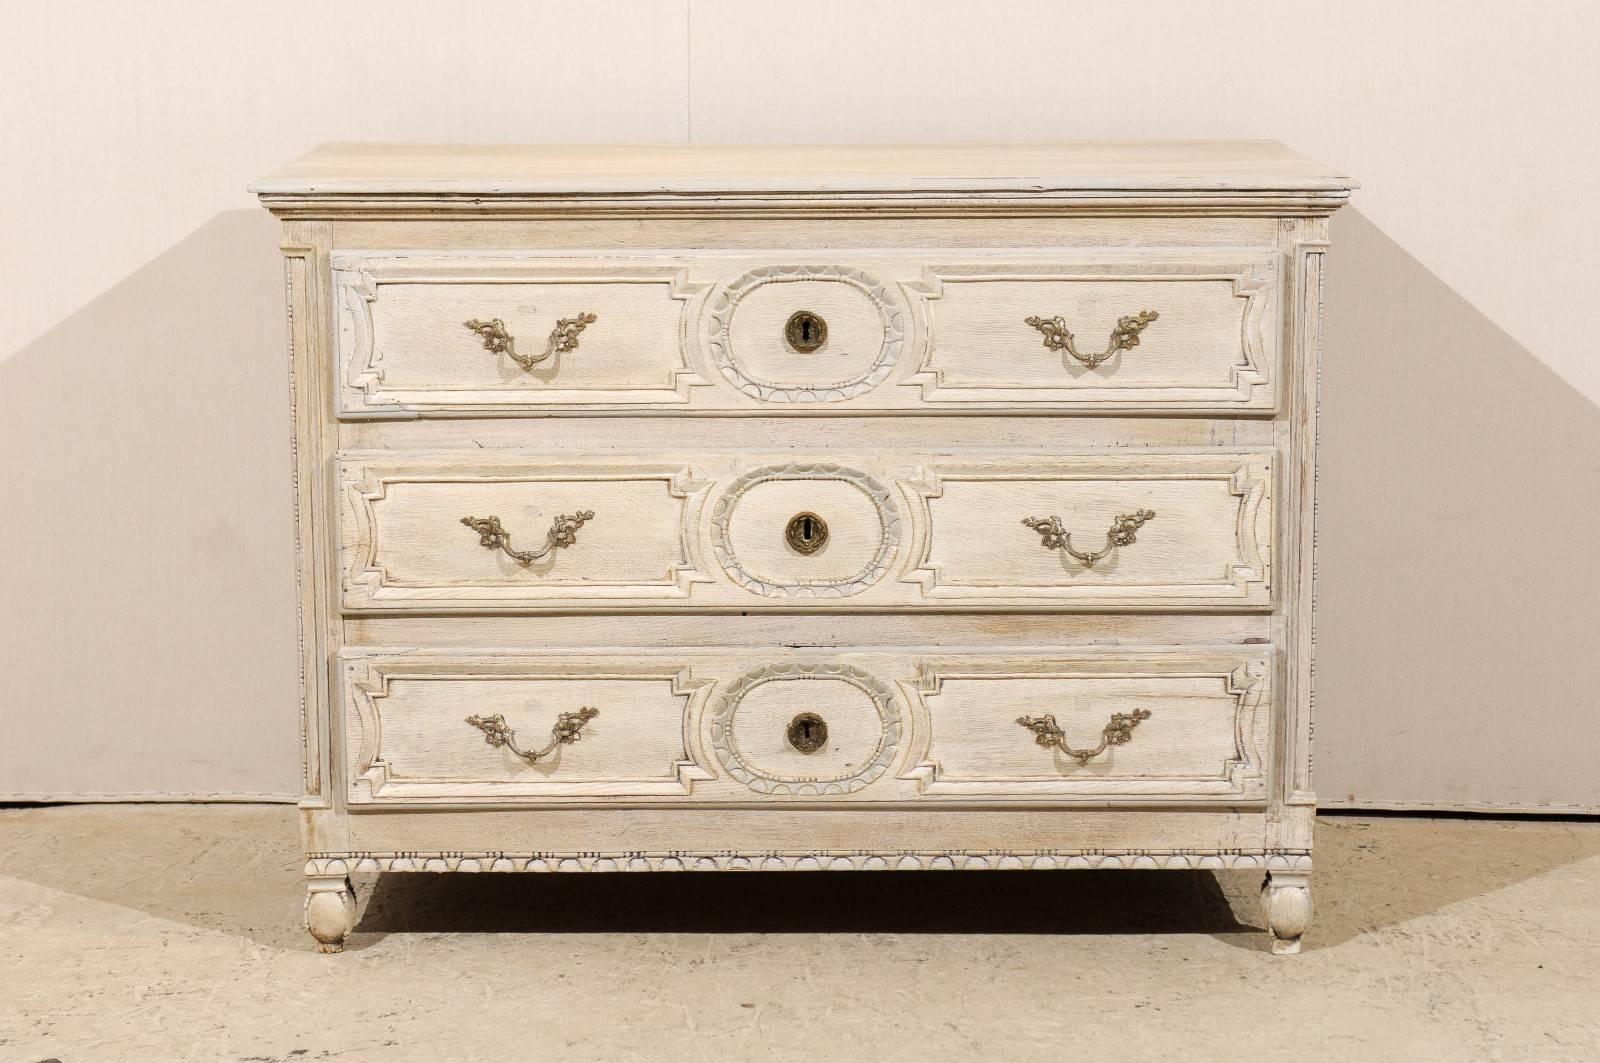 A French late 18th century three-drawer chest. This French chest features three drawers decorated with geometrical motifs and Rococo style hardware, as well as nicely carved molding. It is of a light cream color with a slight traces of yellow and is